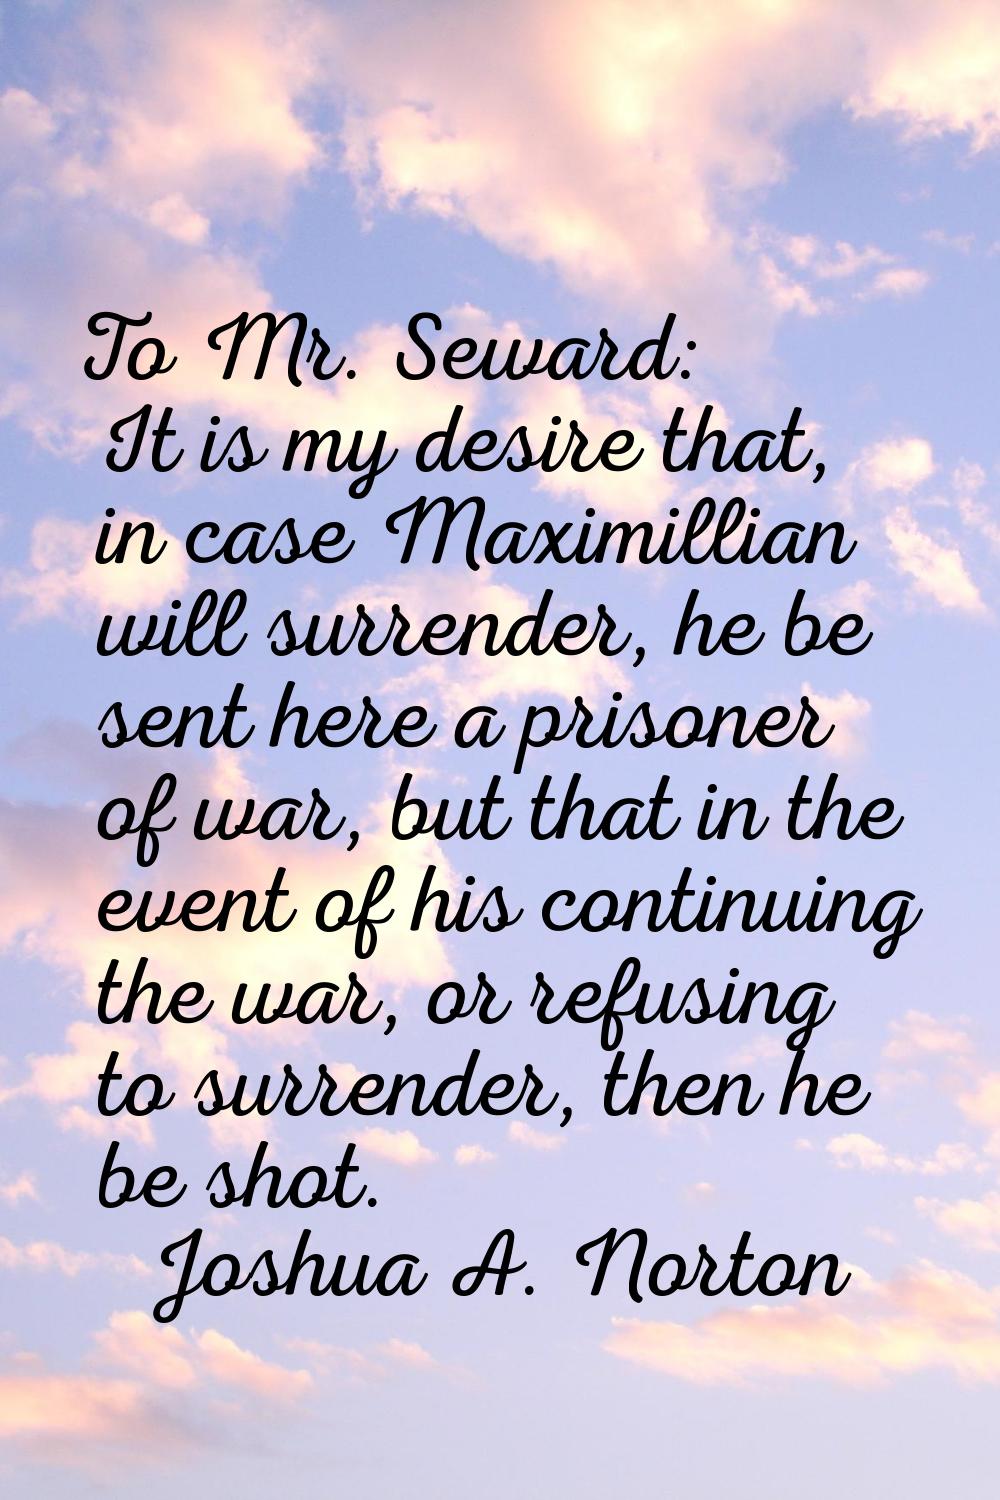 To Mr. Seward: It is my desire that, in case Maximillian will surrender, he be sent here a prisoner